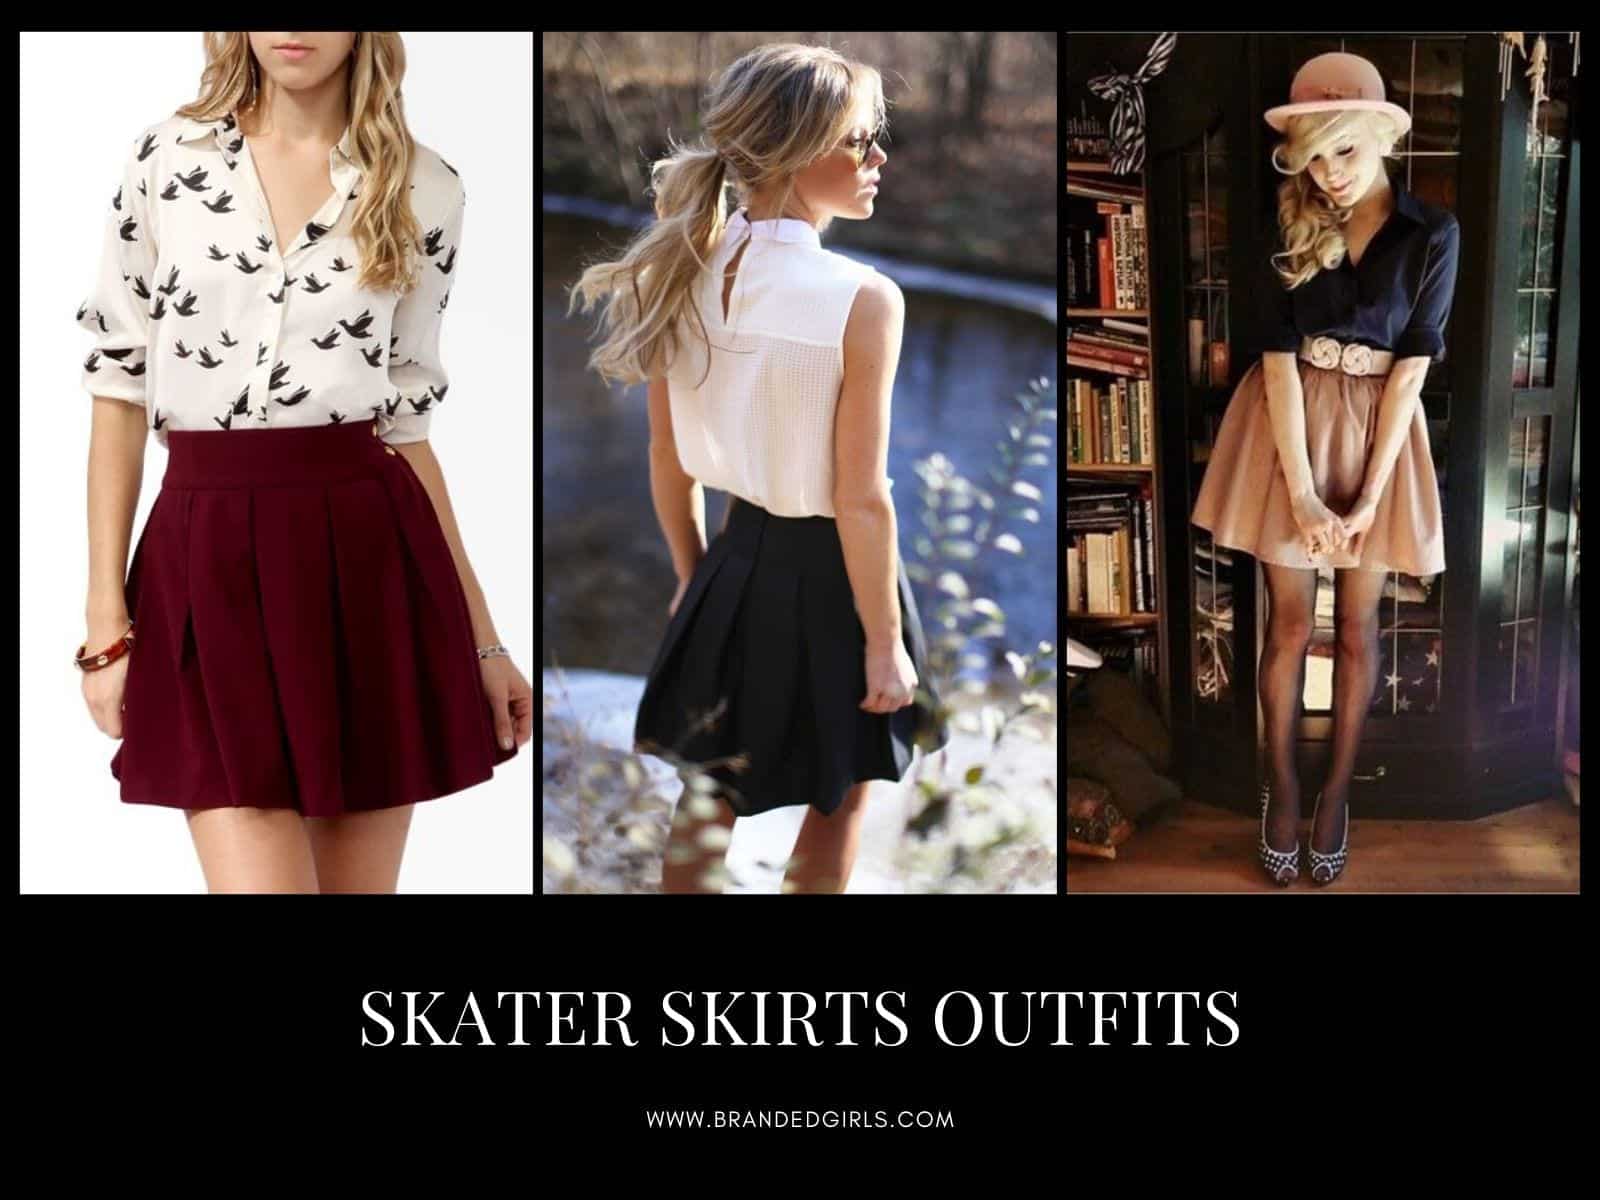 Skater Skirts Outfits- 20 Ways to Wear & Style Skater Skirts